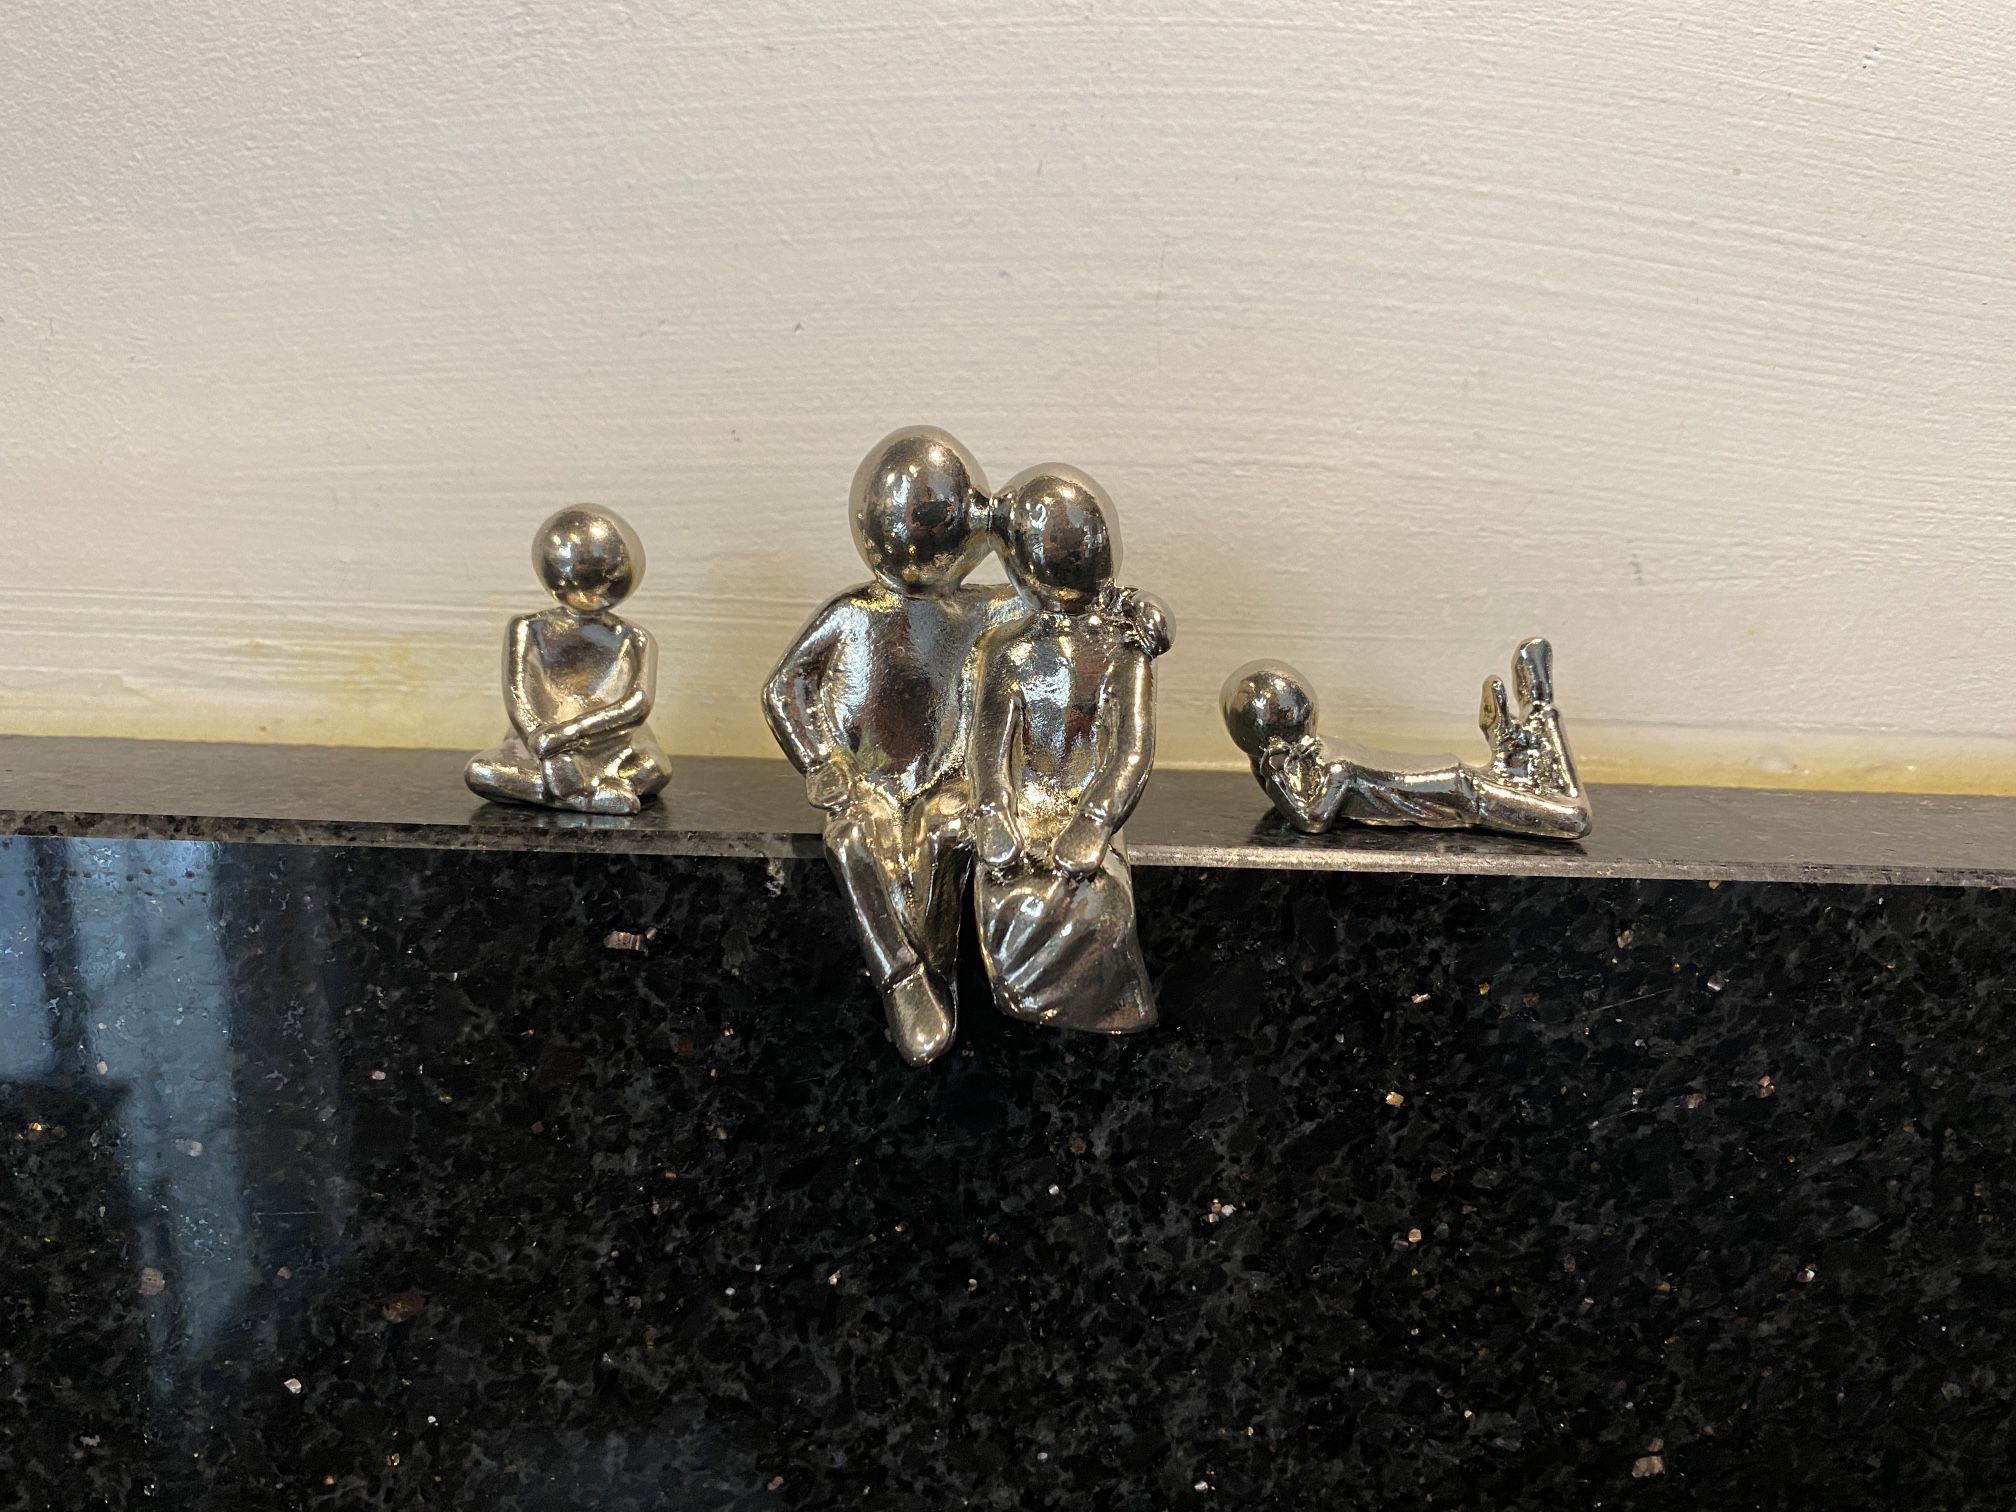 3 Pieces Family with Children Miniature Metal Figures 1-2”